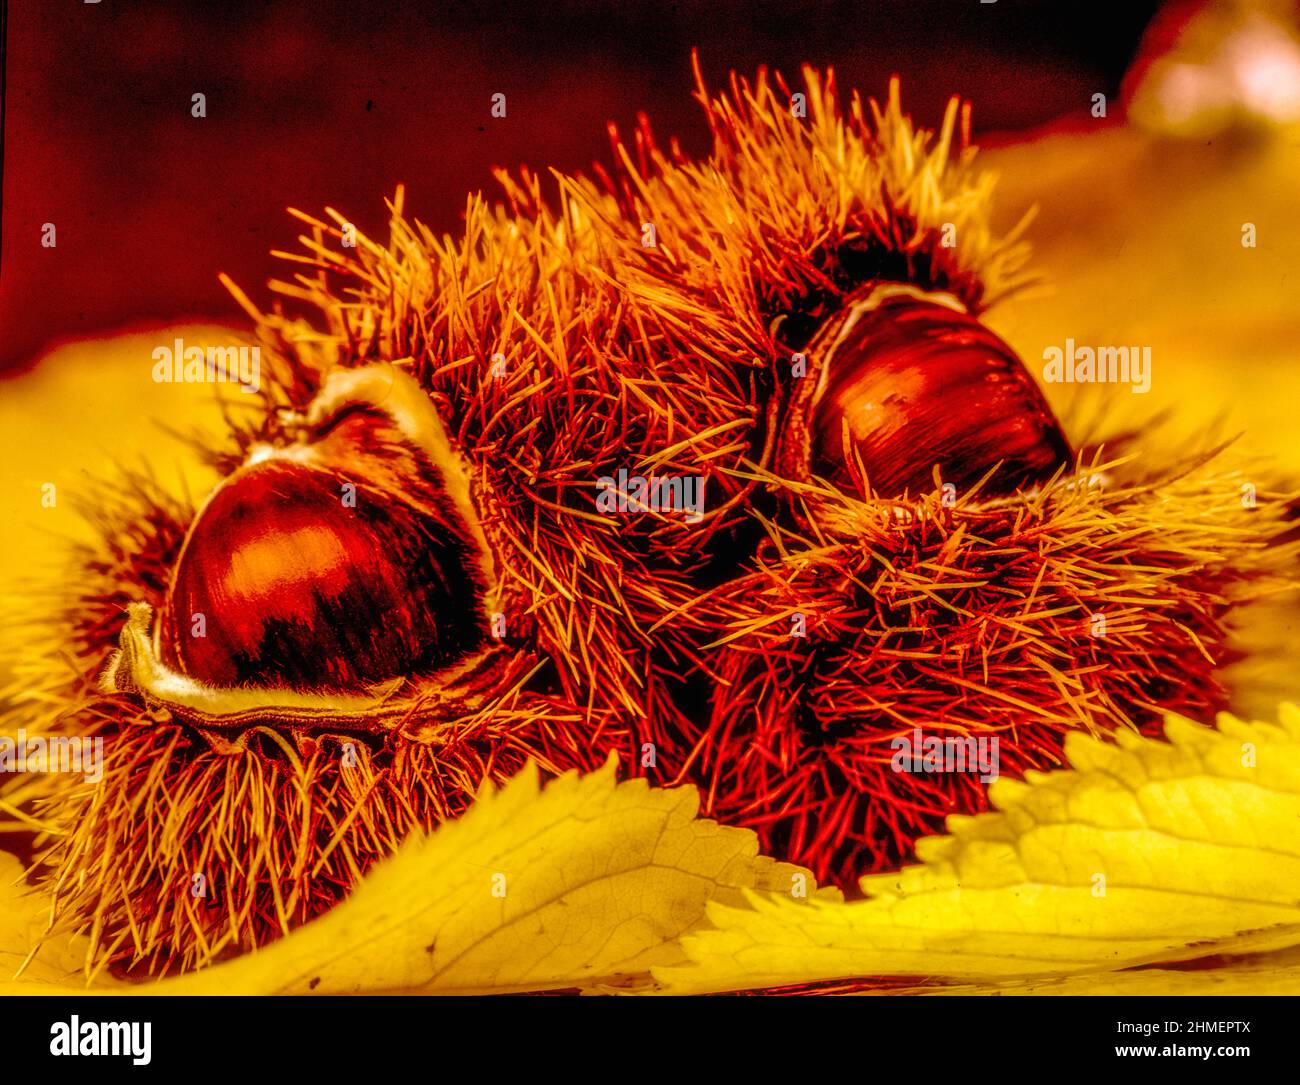 Macro natural forage food portrait of Castanea sativa, sweet chestnut, patterns and textures in nature Stock Photo